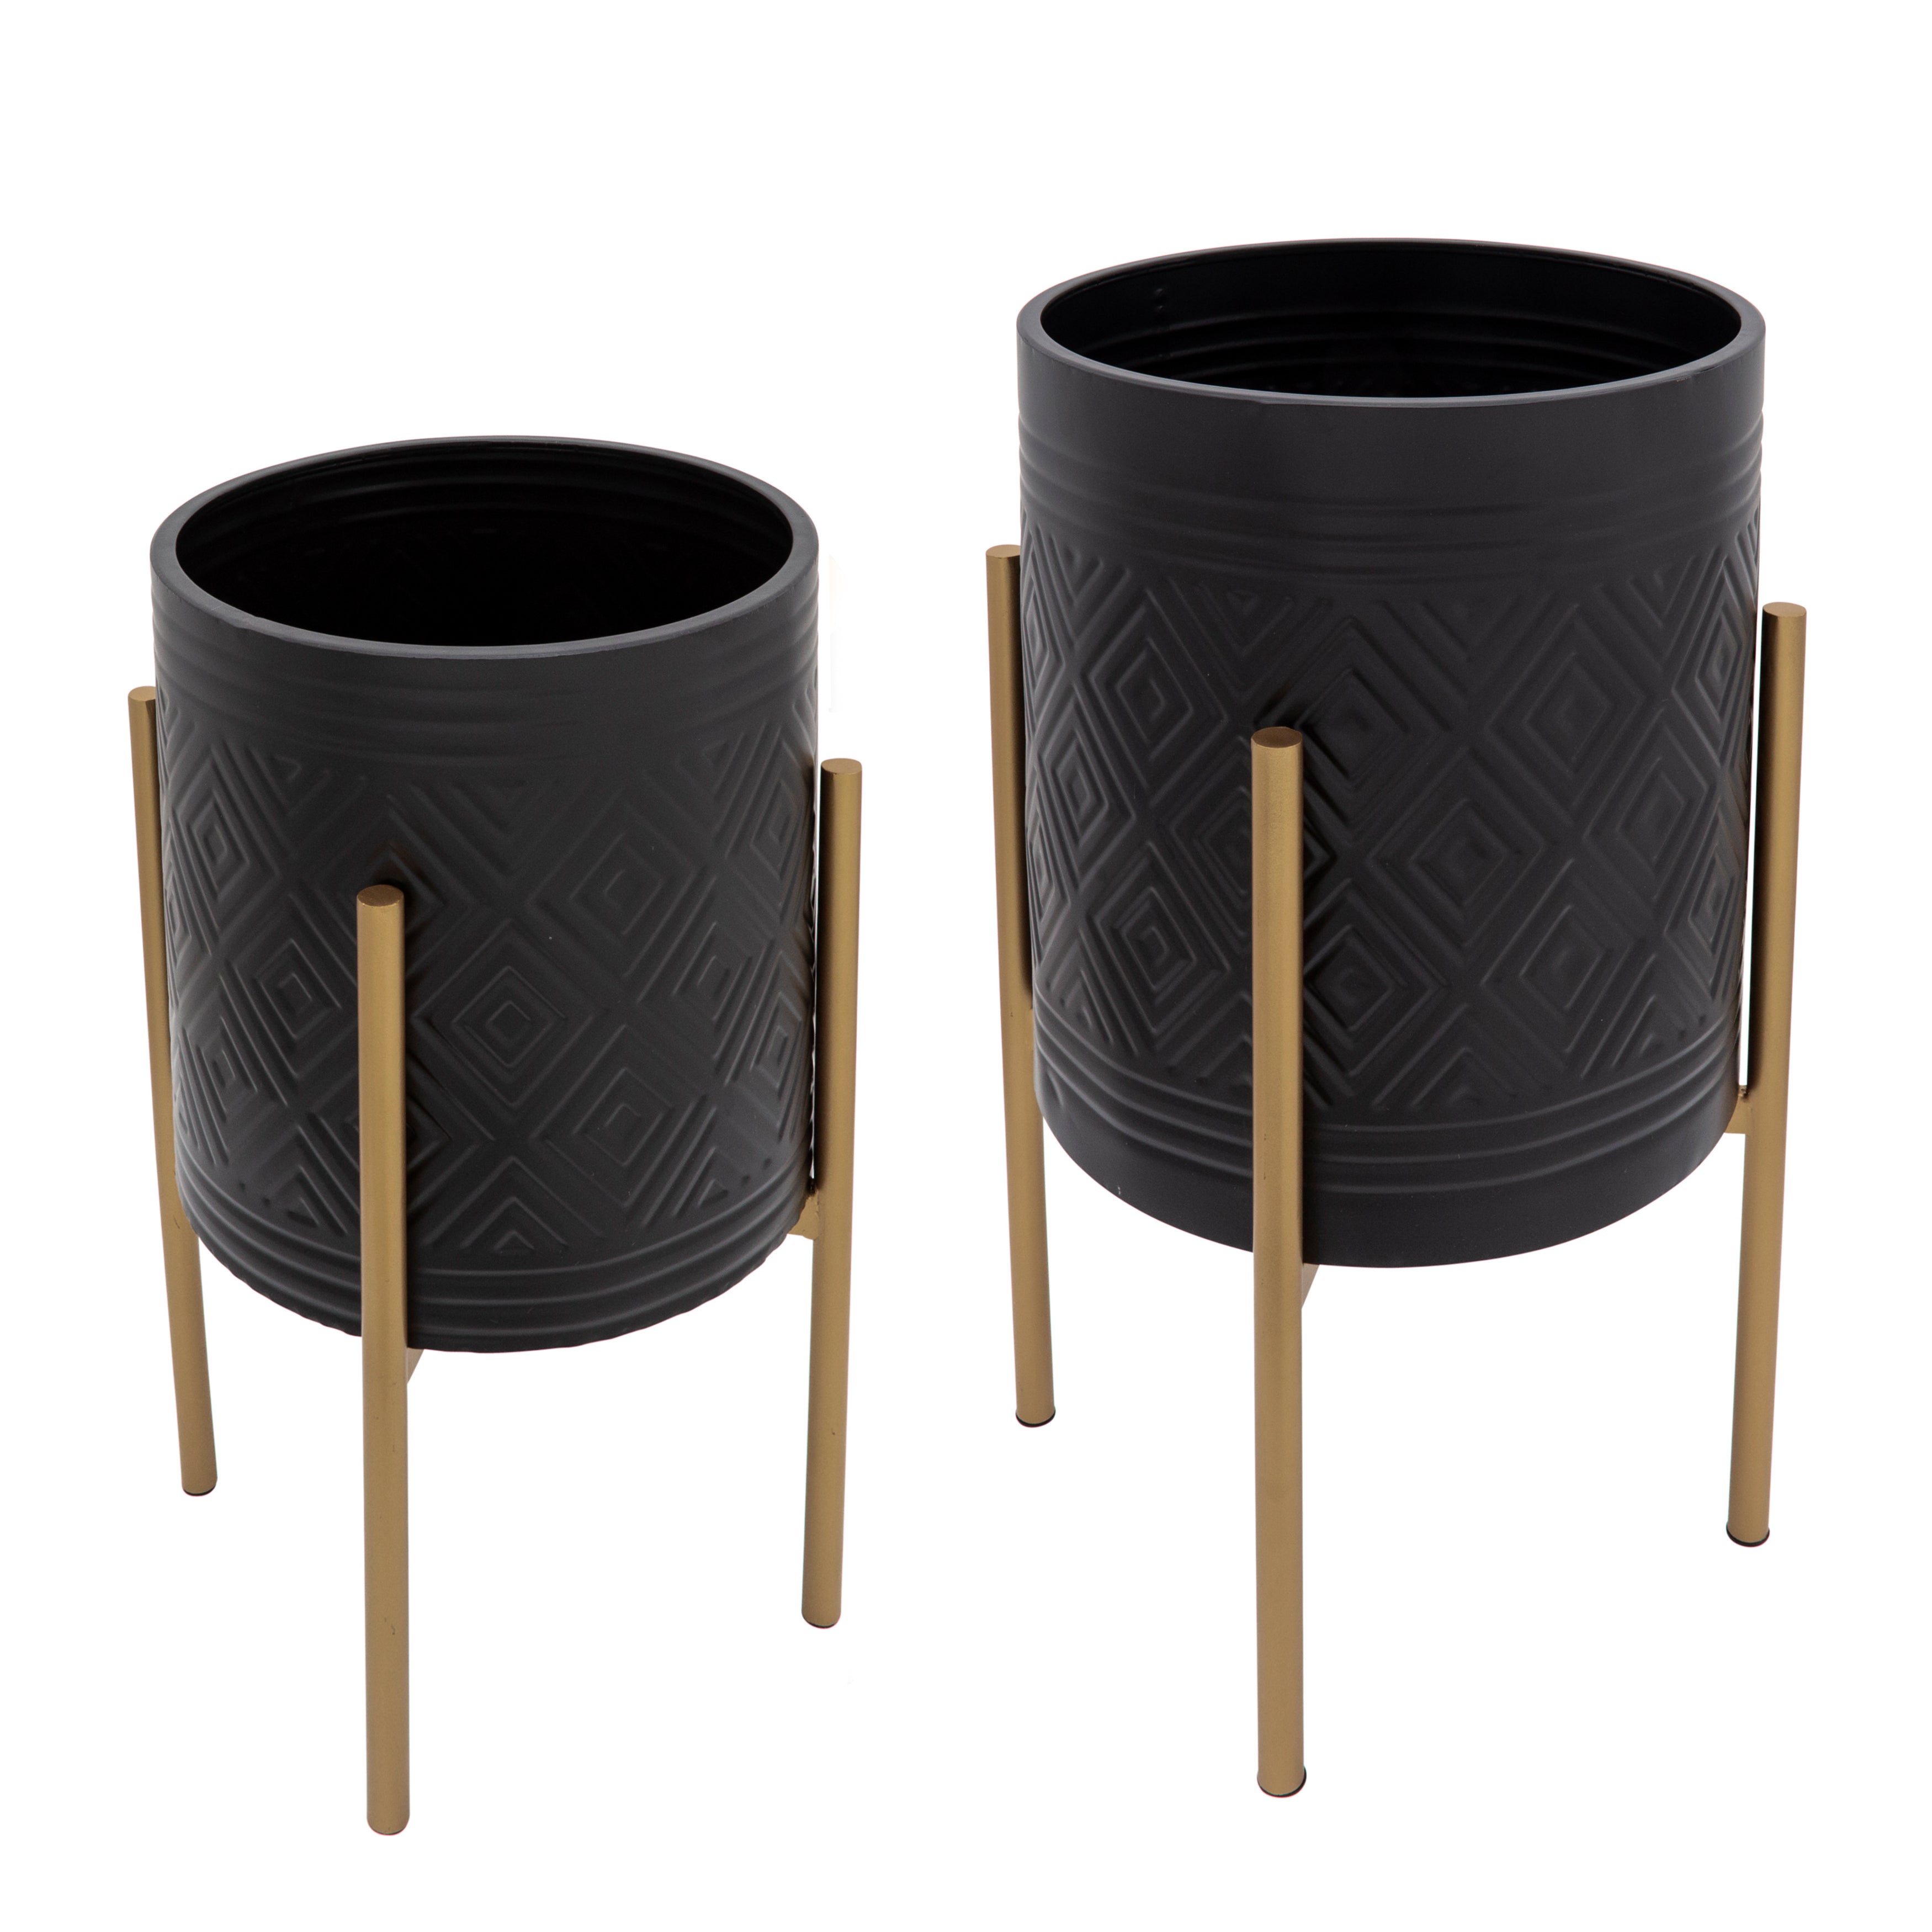 Set of 2 Aztec Planters On Stand, Black/Gold, Planters